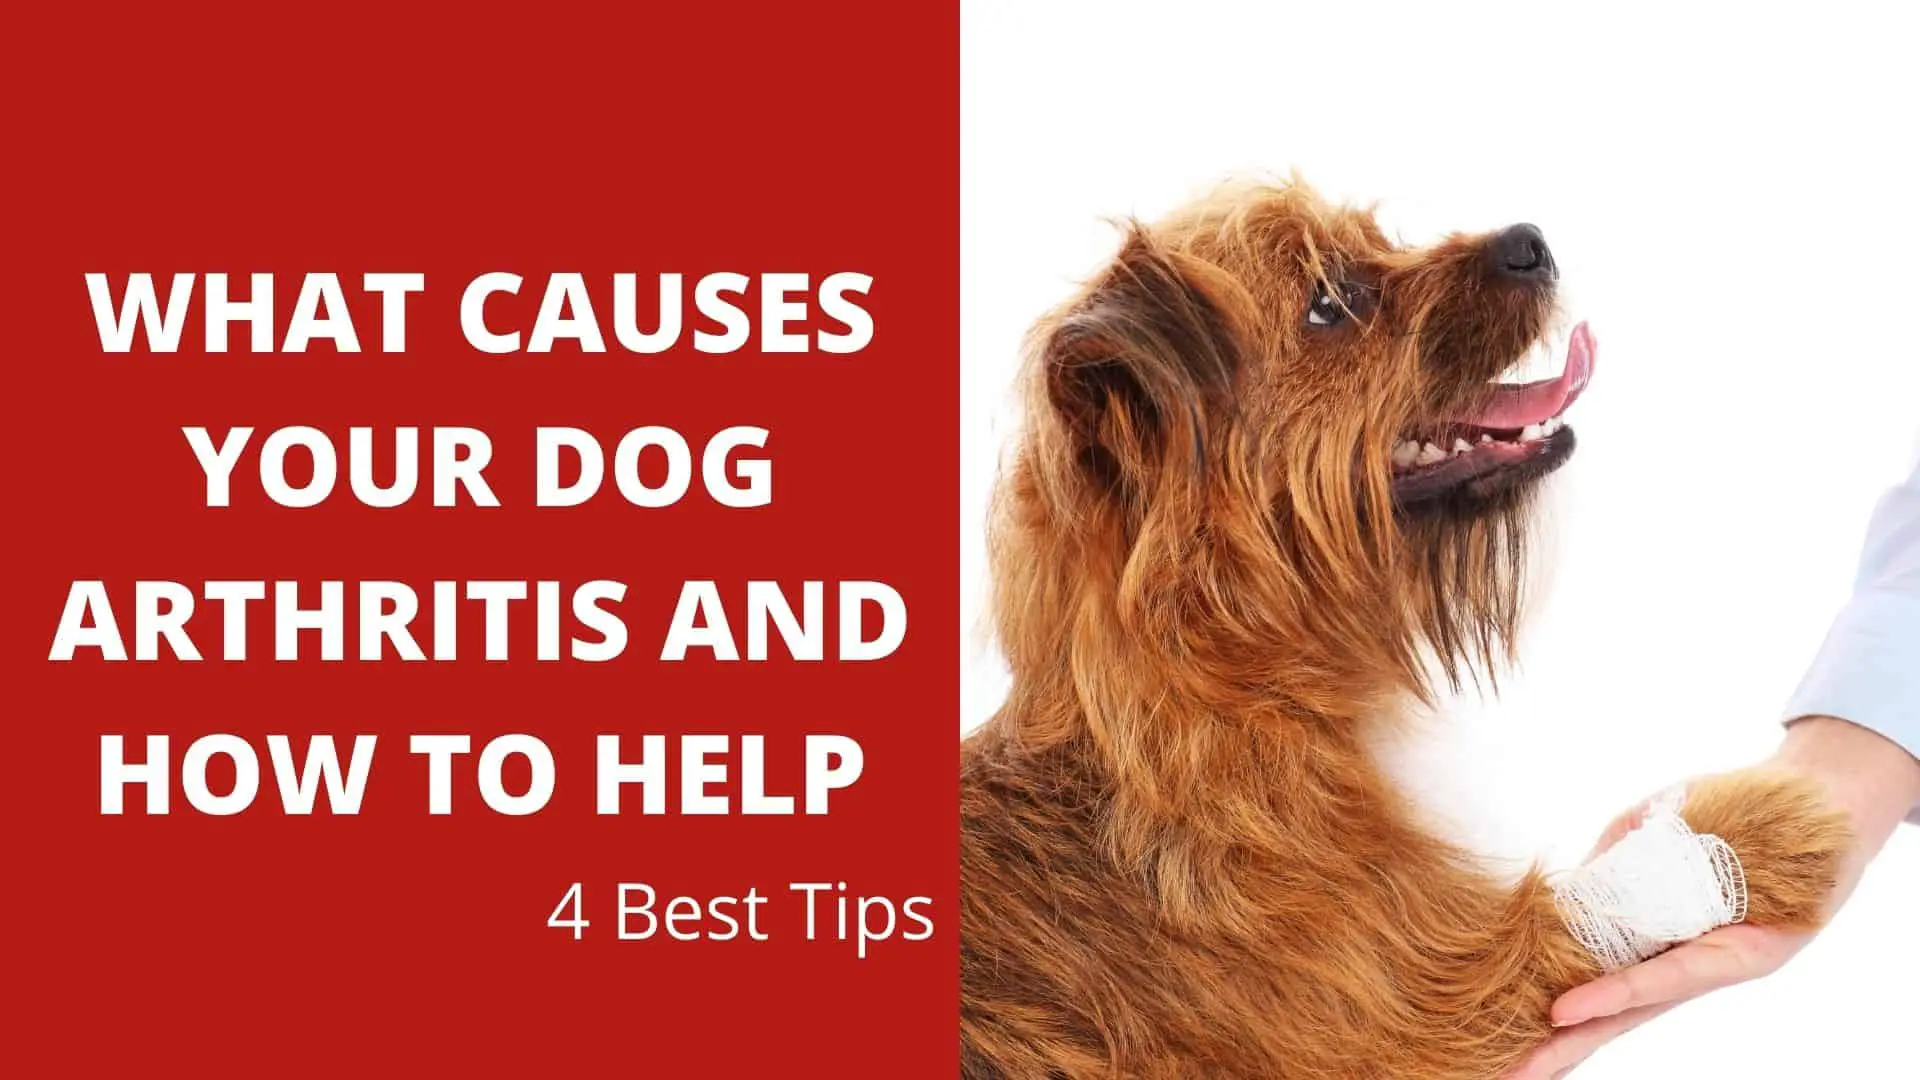 What Causes Your Dog Arthritis And How To Help Best 4 Tips